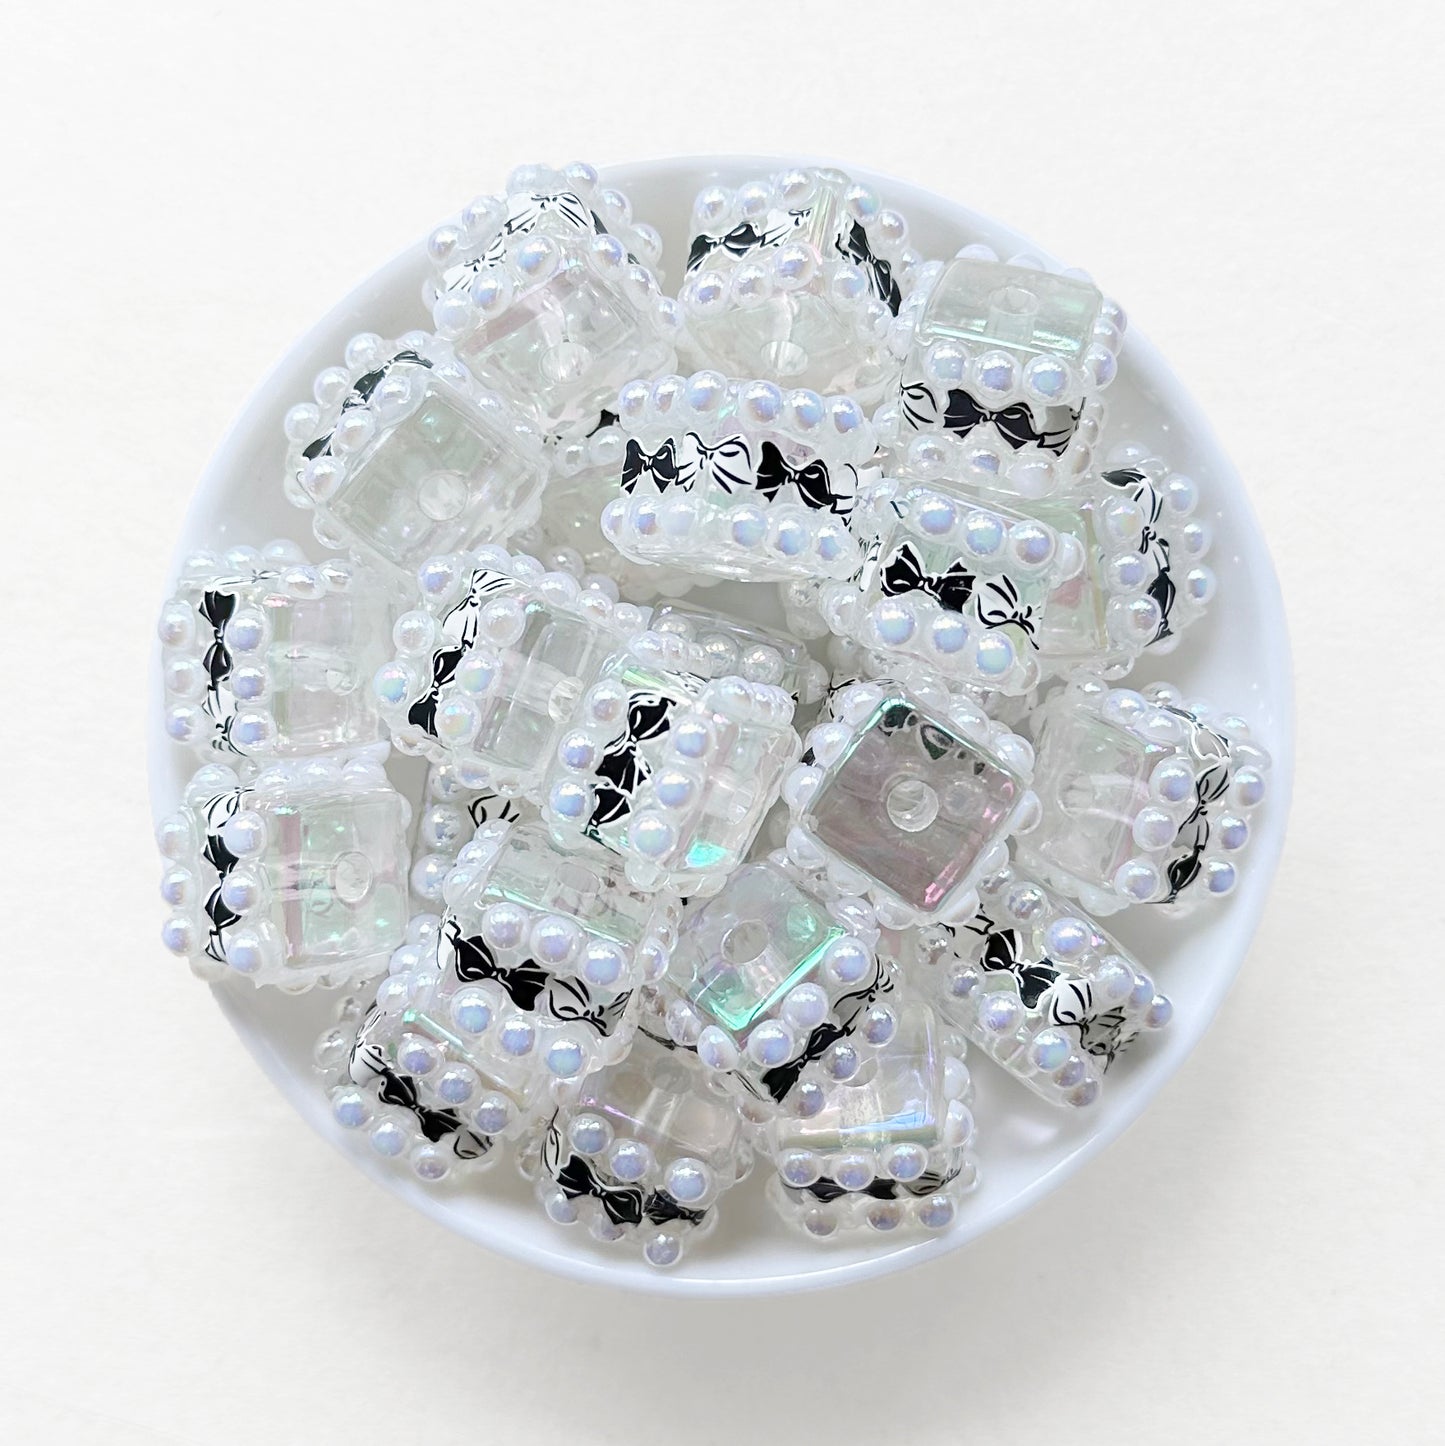 Cube Pearl Acrylic Beads,Bowknot Square Beads